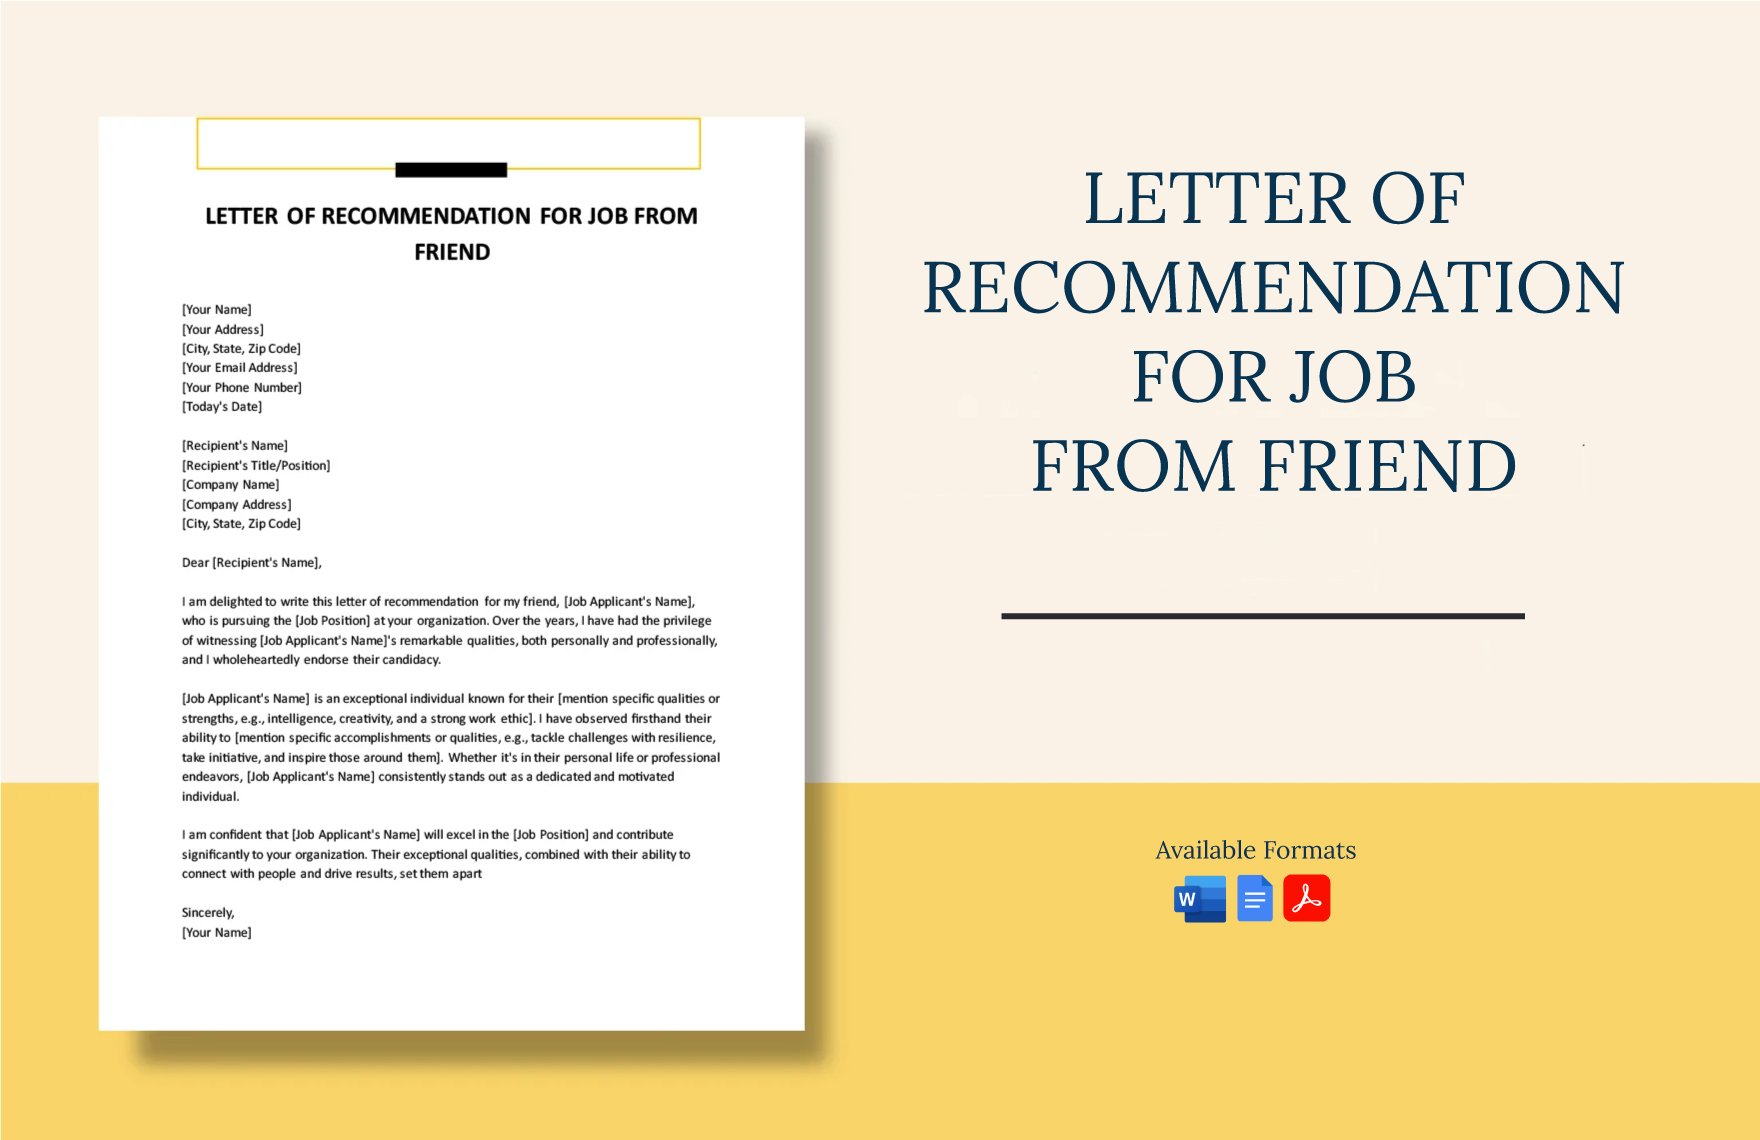 Letter Of Recommendation For Job From Friend